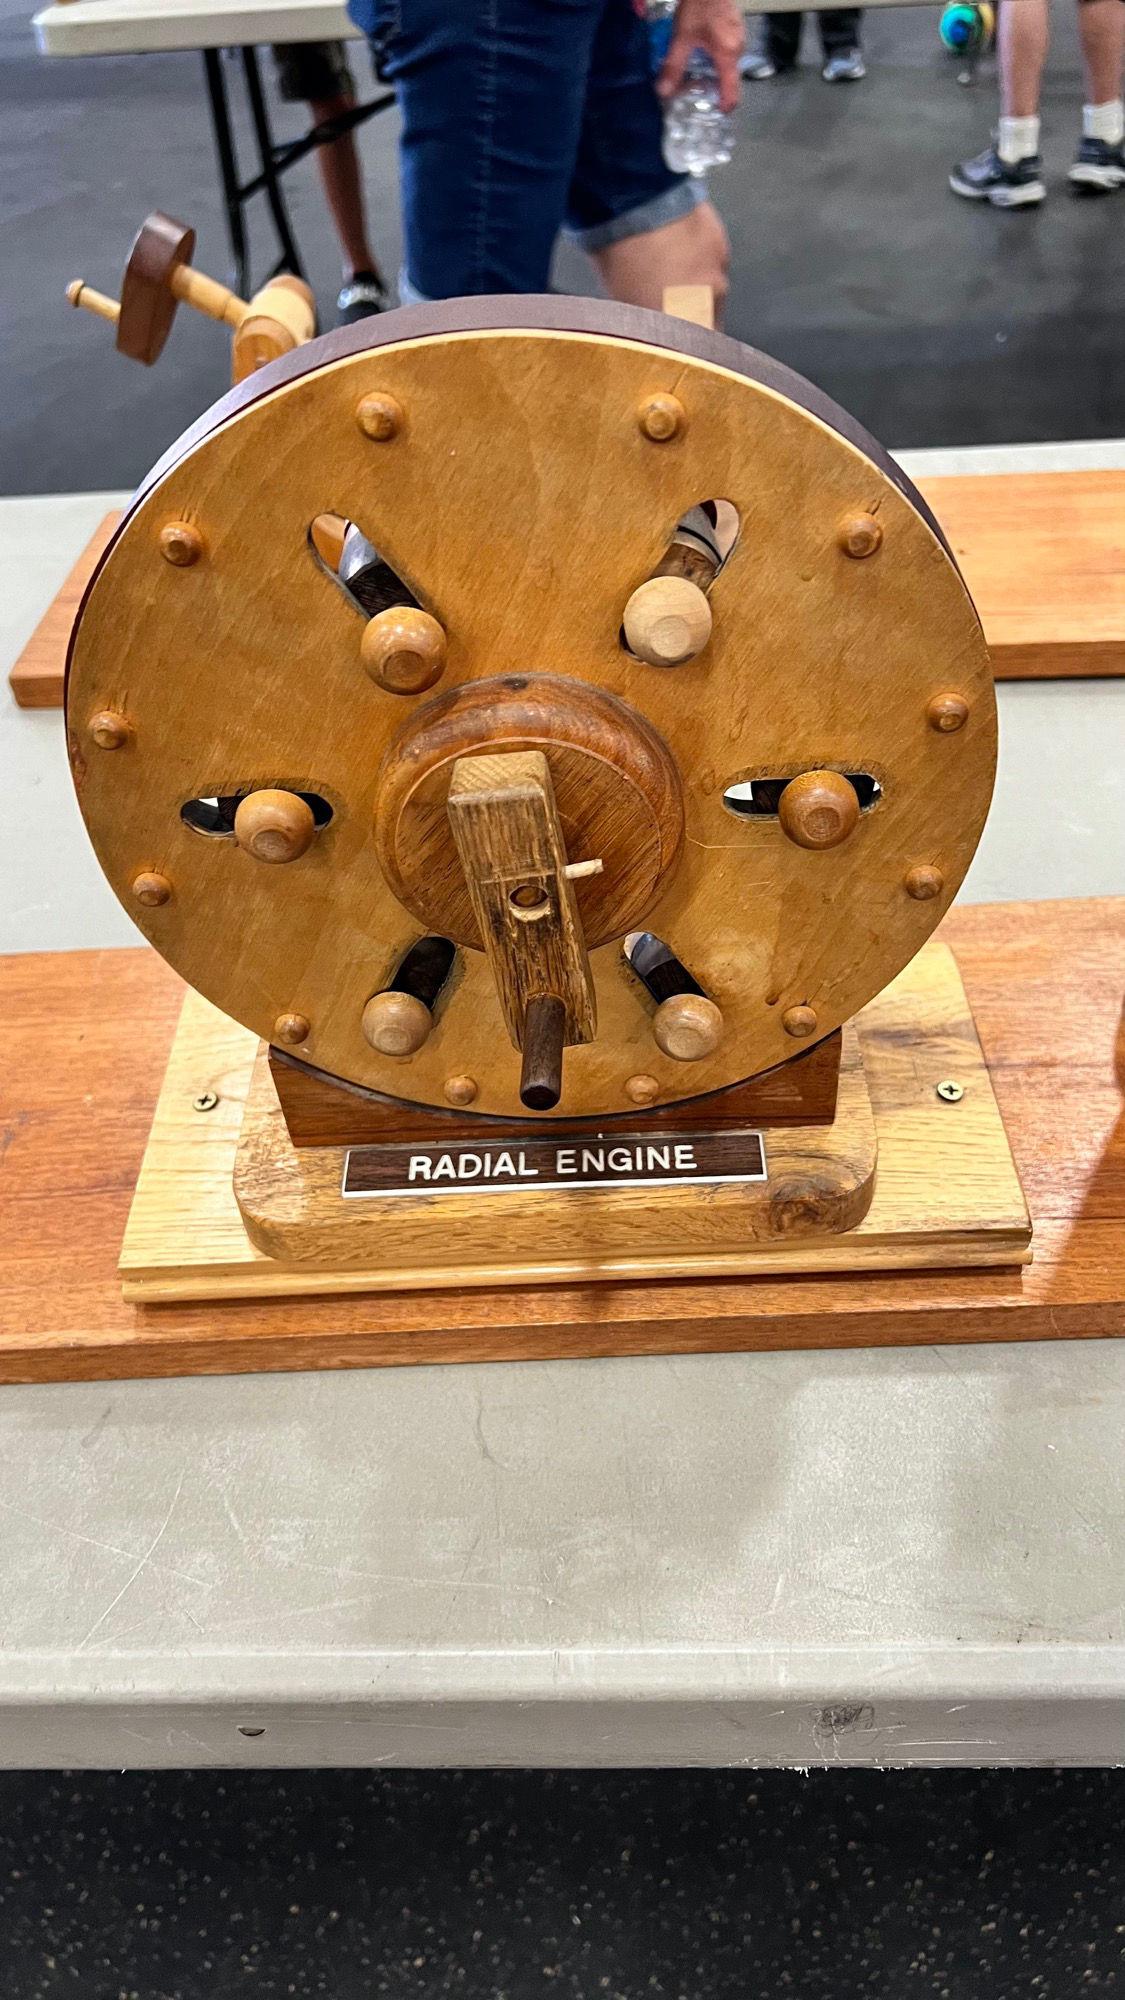 Youth Expo Radial Engine